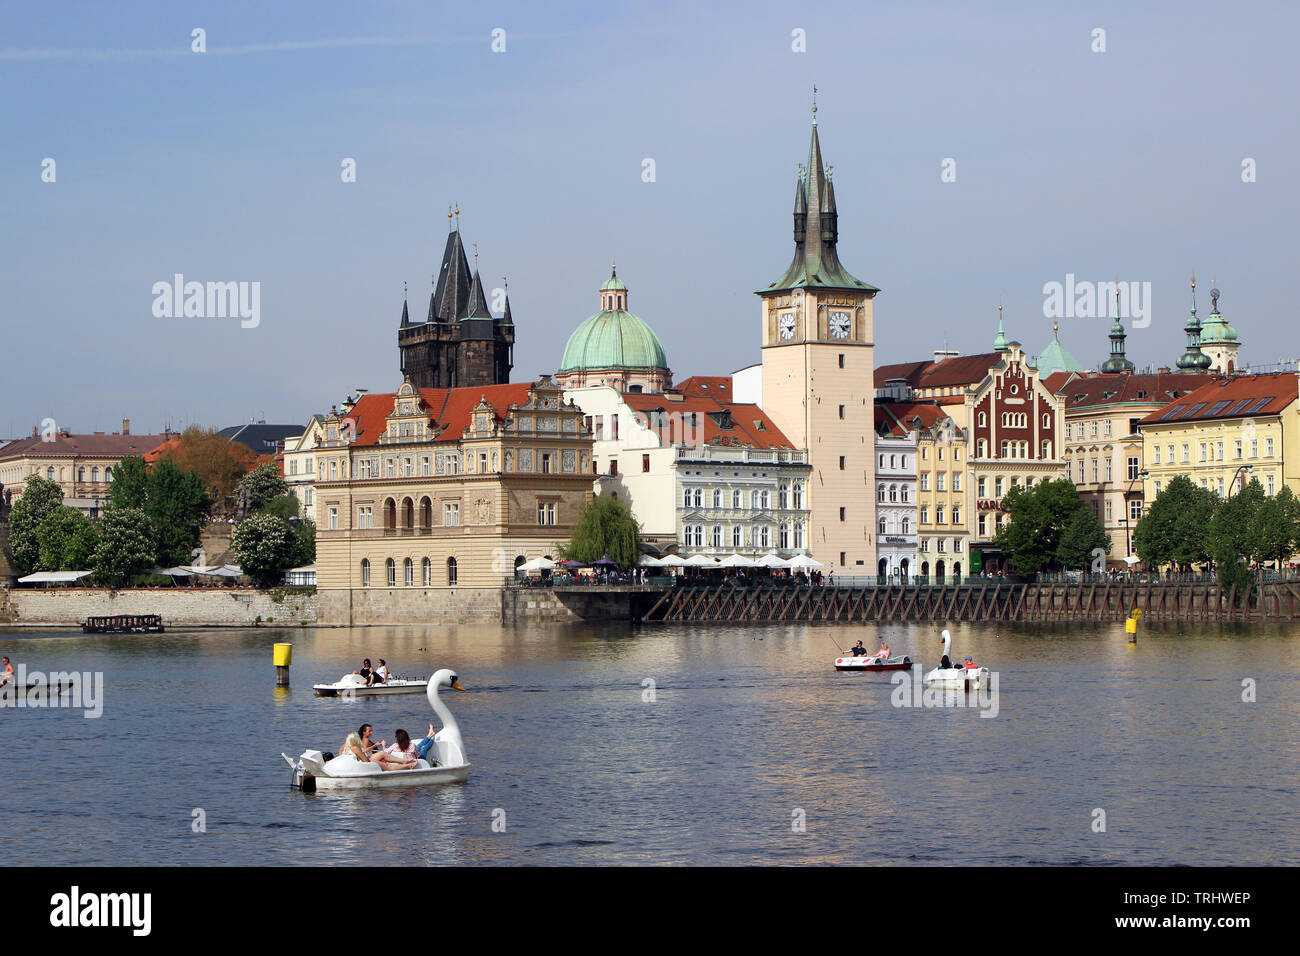 Paddle boats on Vltava River, Old Town on background, in Prague, Czech Republic Stock Photo